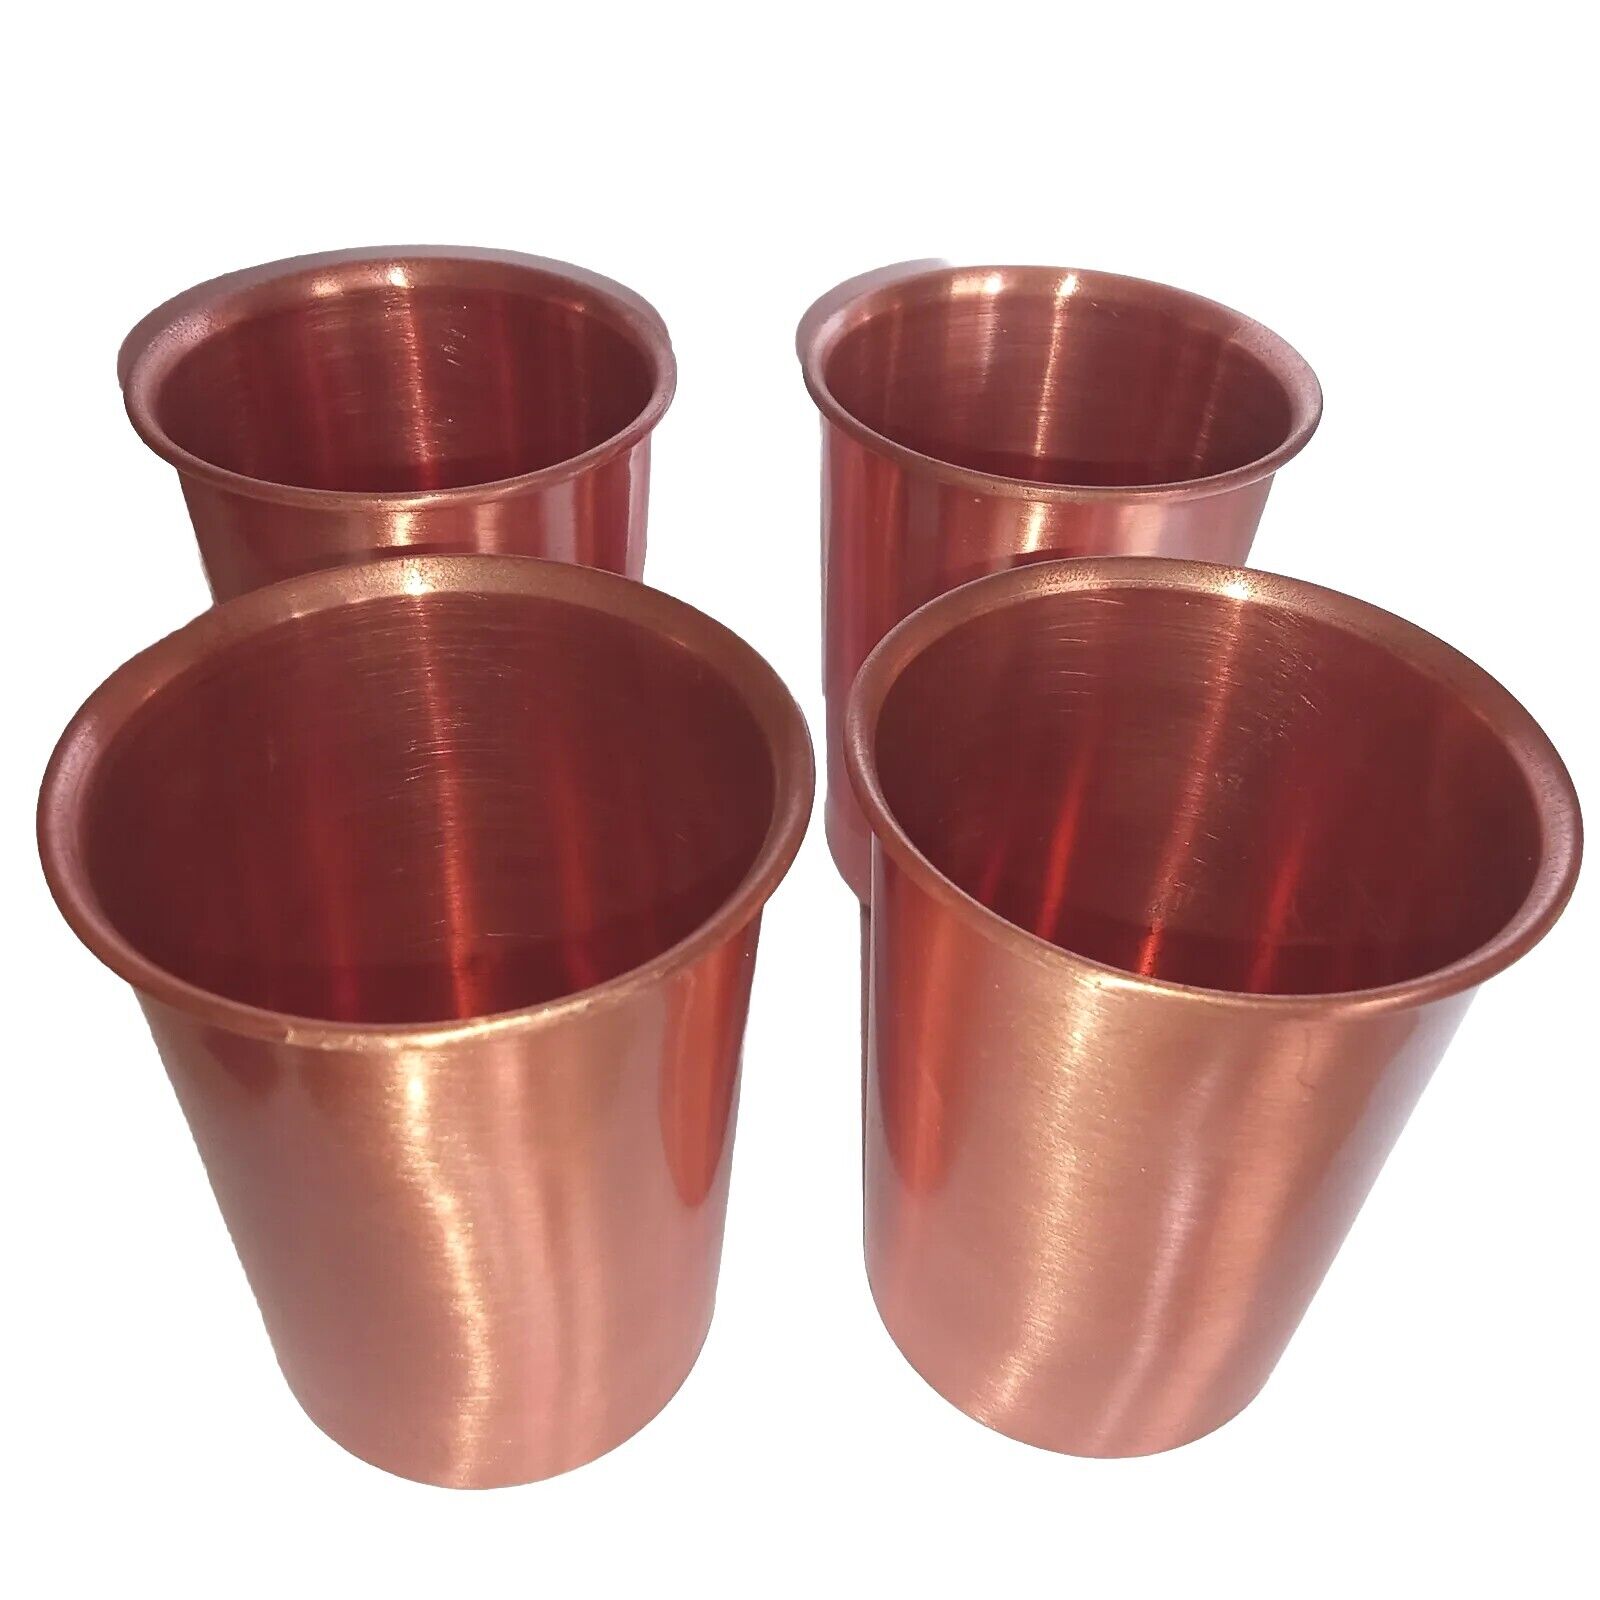 4X 100% PURE COPPER 300 ML RING GLASS AYURVEDIC BENEFITS WATER TUMBLER CUP